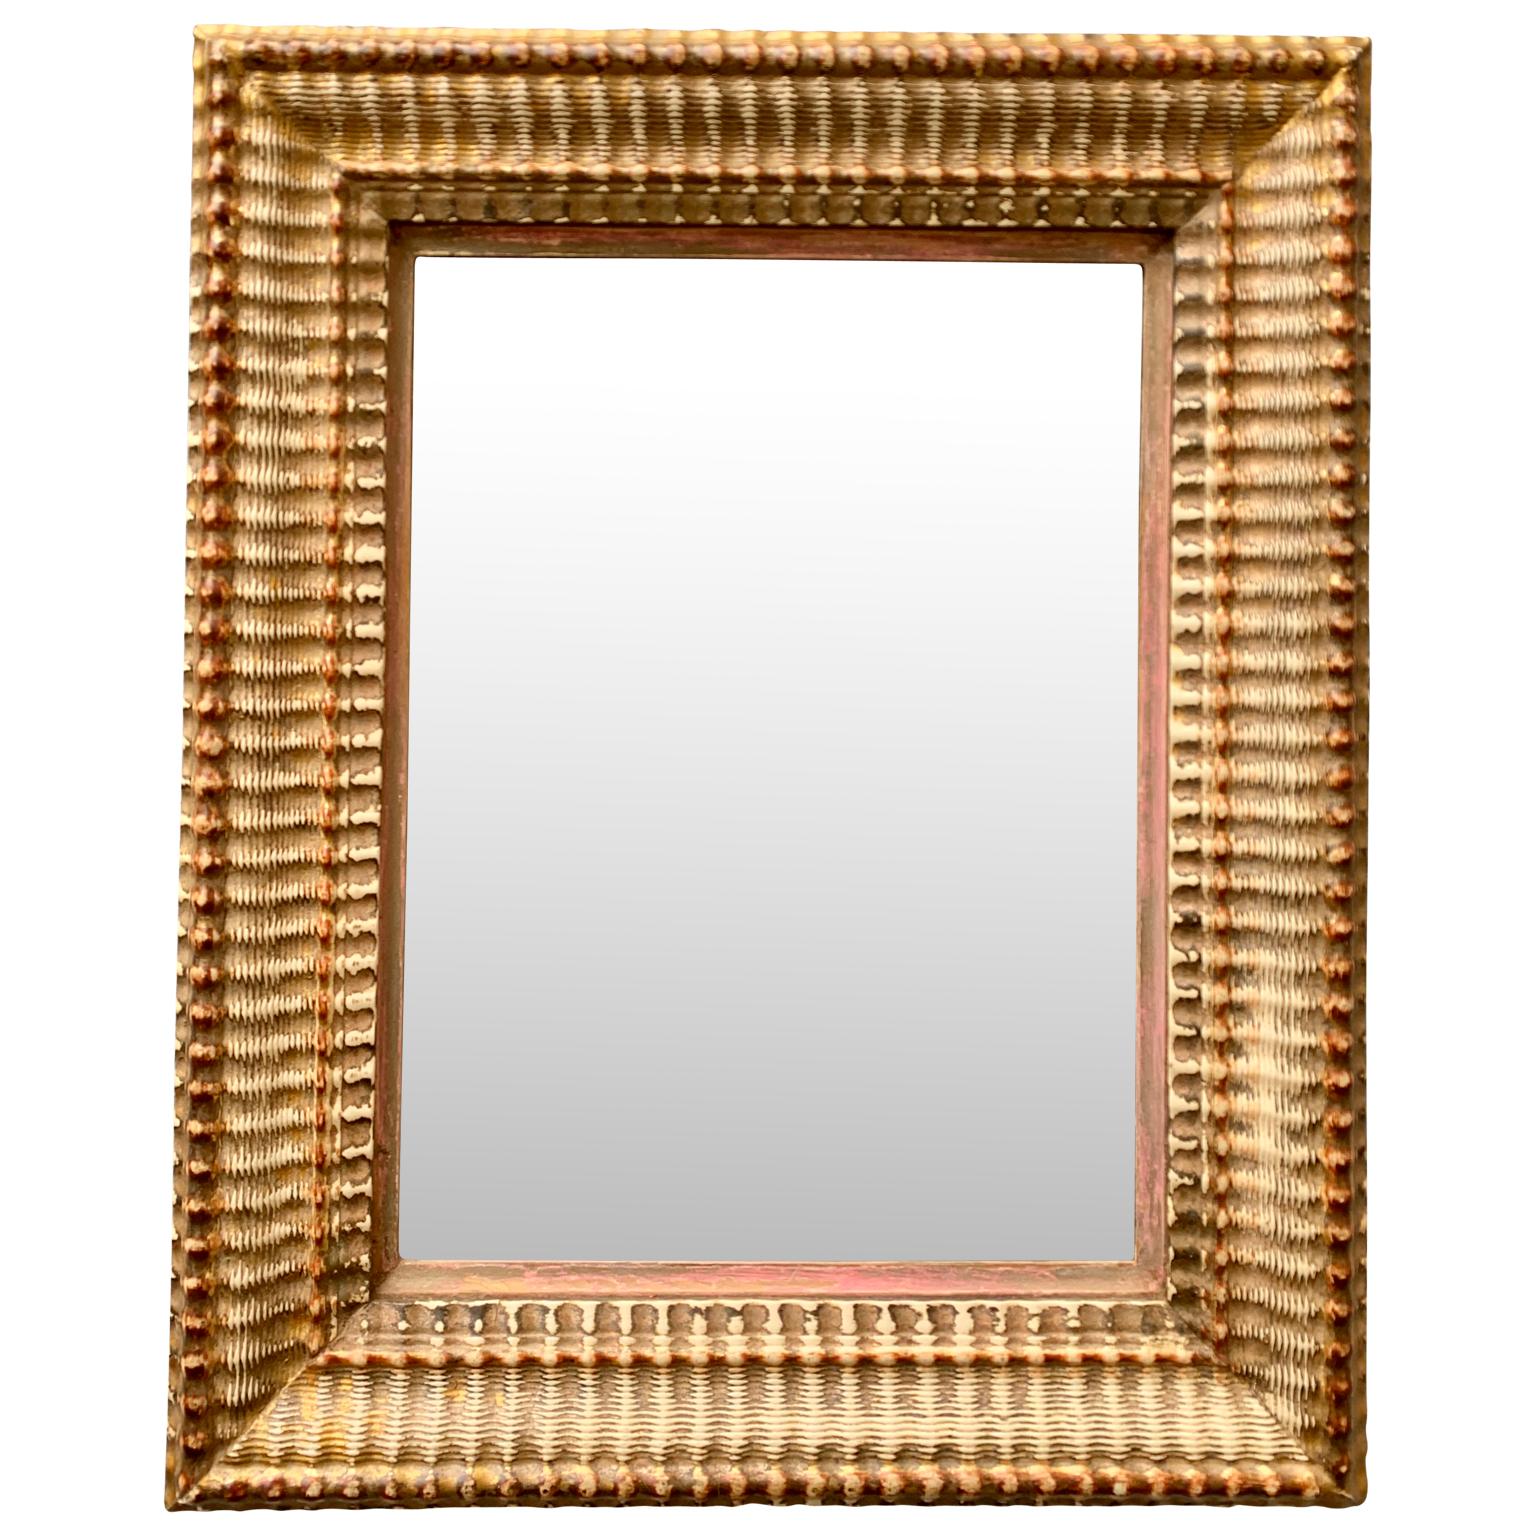 An early 19th Century French guilted mirror with wave shaped form. Original patina and wear to gold leaf surface, wear the ground color and material emerge showing the age appropriate patina.
Mirror glass is the original piece.
  